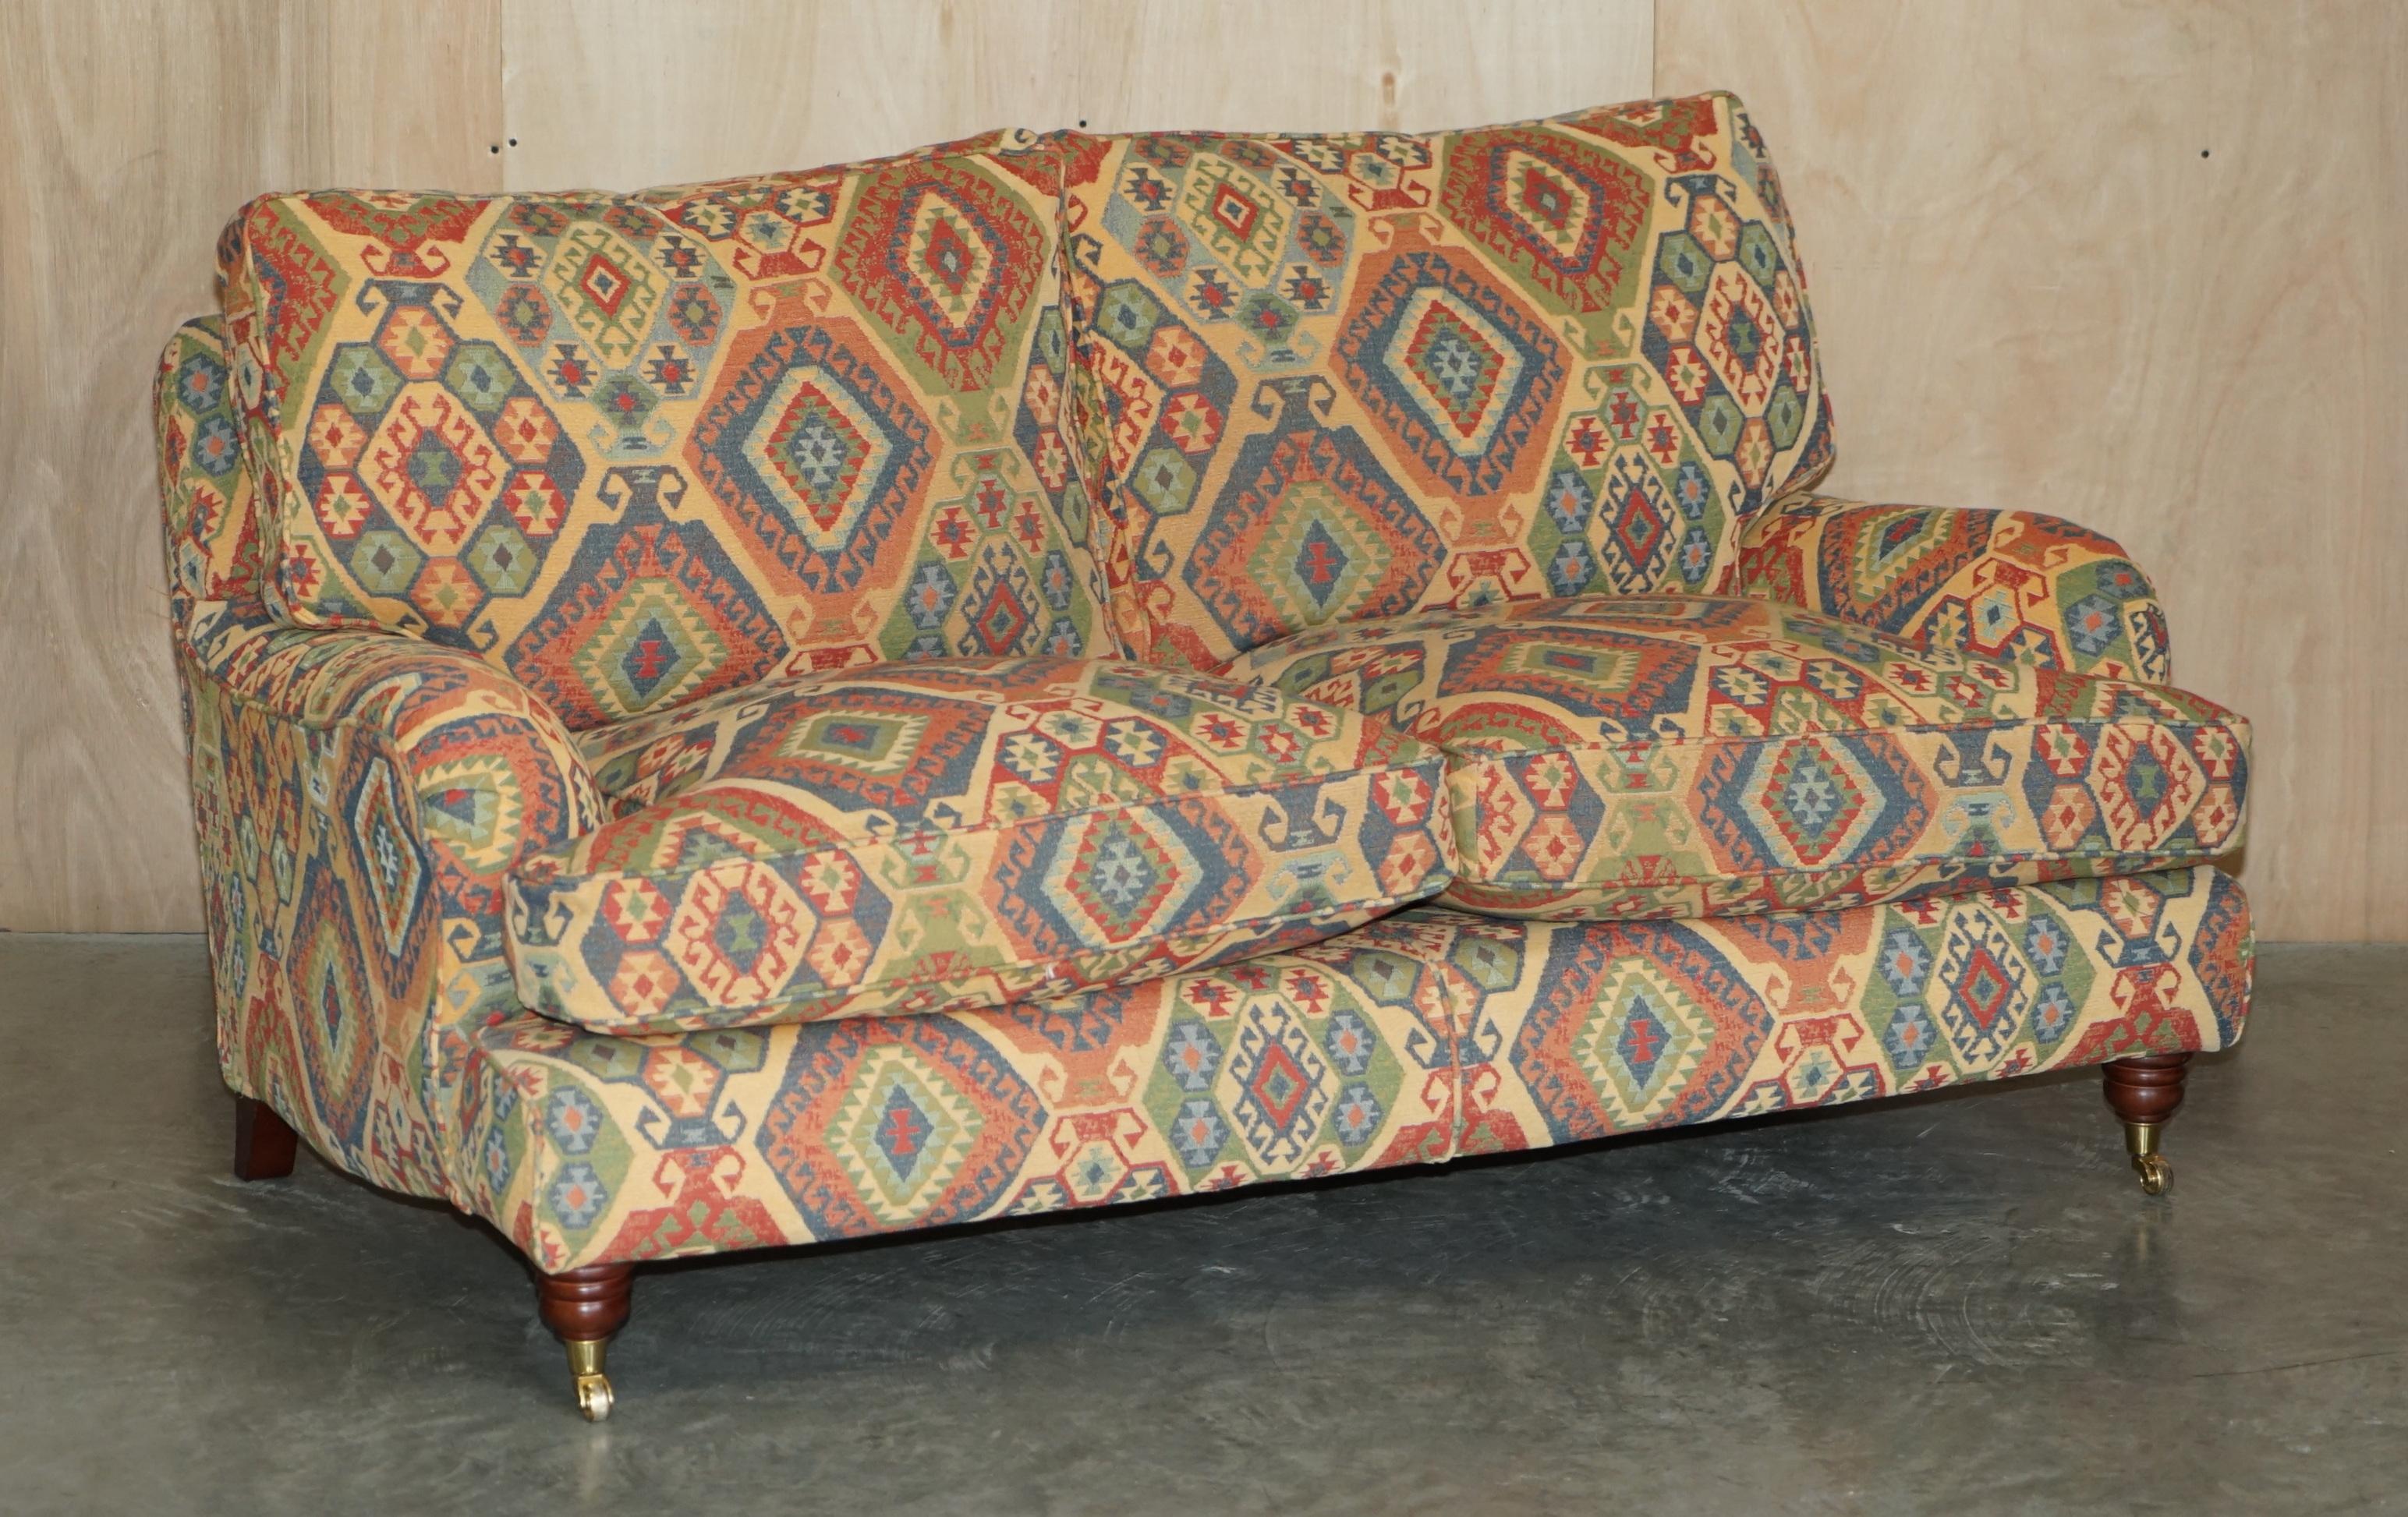 We are delighted to offer for sale this stunning original MultiYork 2-3 seat sofa with matching armchair upholstered in Kilim Fabric.

A stunning suite by the great British firm that was MultiYork, the fabric has a Kilim pattern and is very